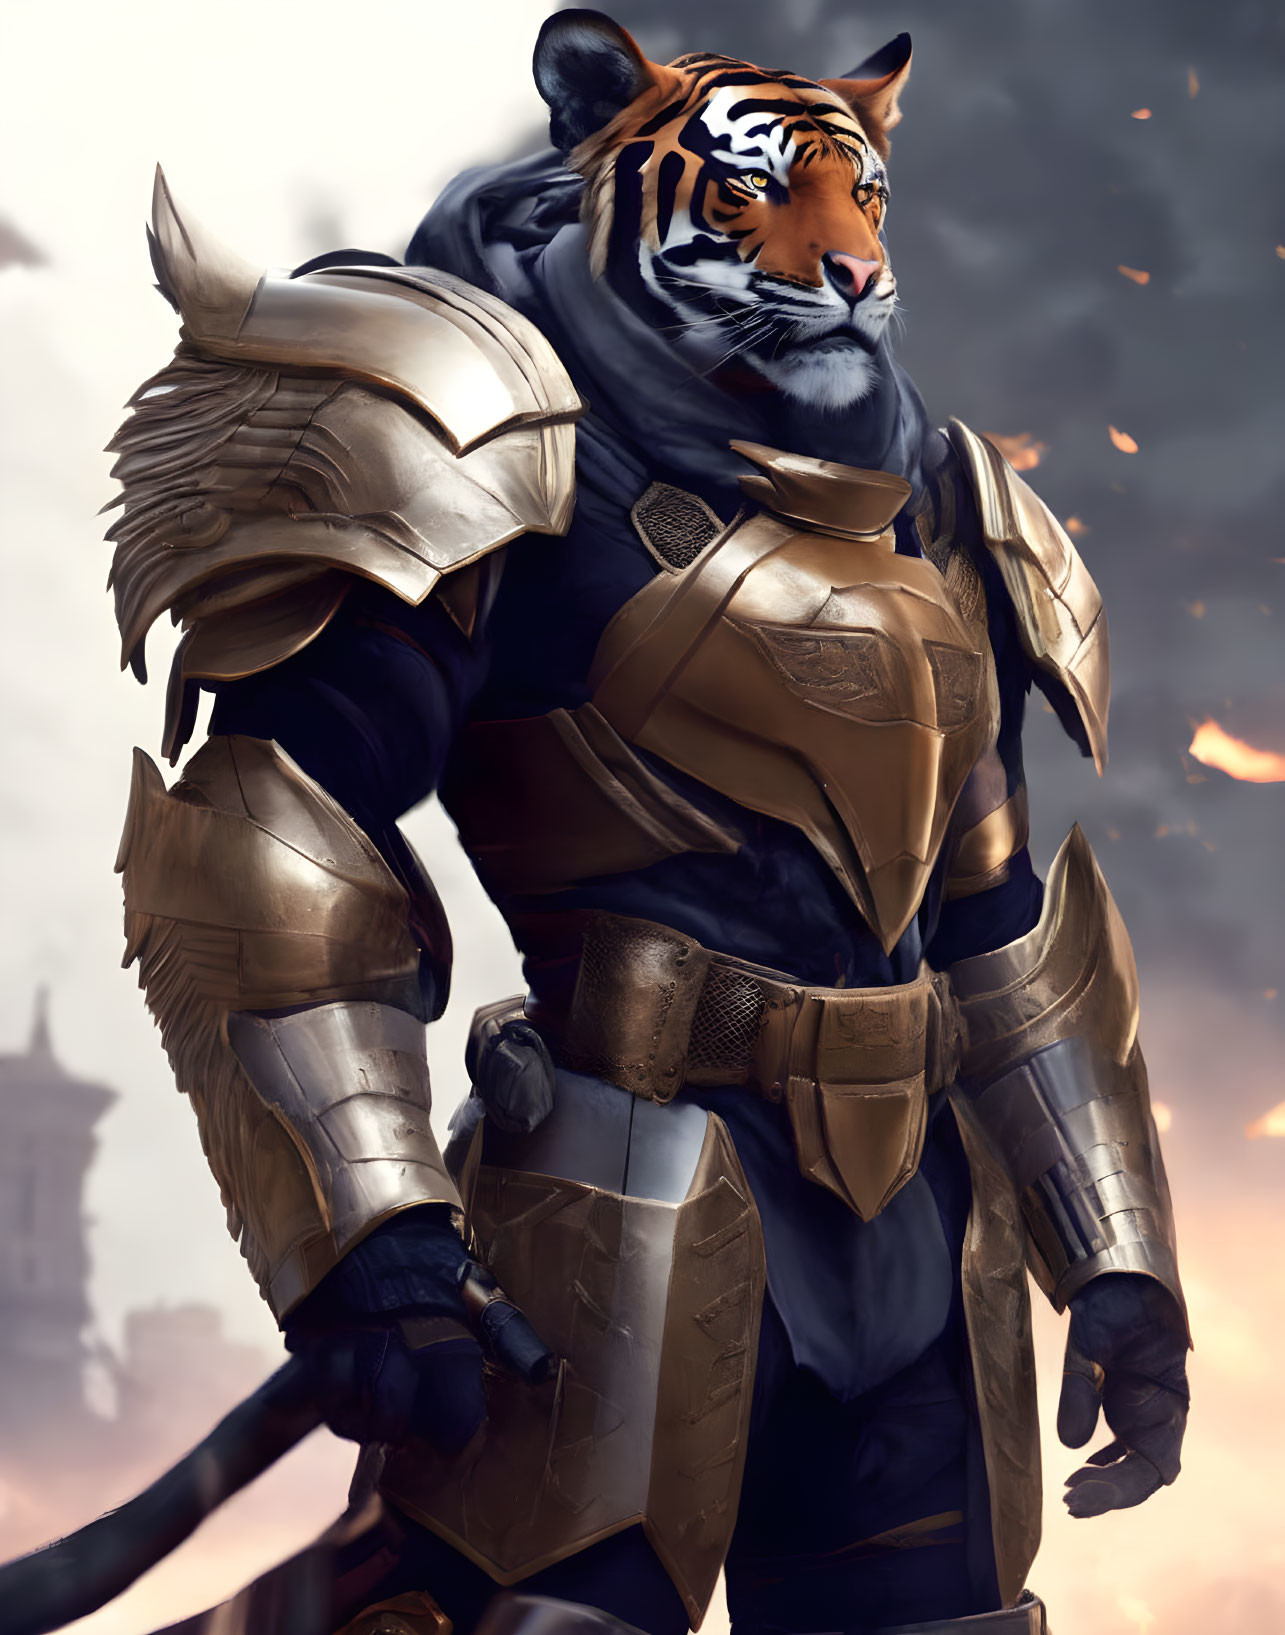 Medieval armor-clad tiger in front of castle under fiery sky